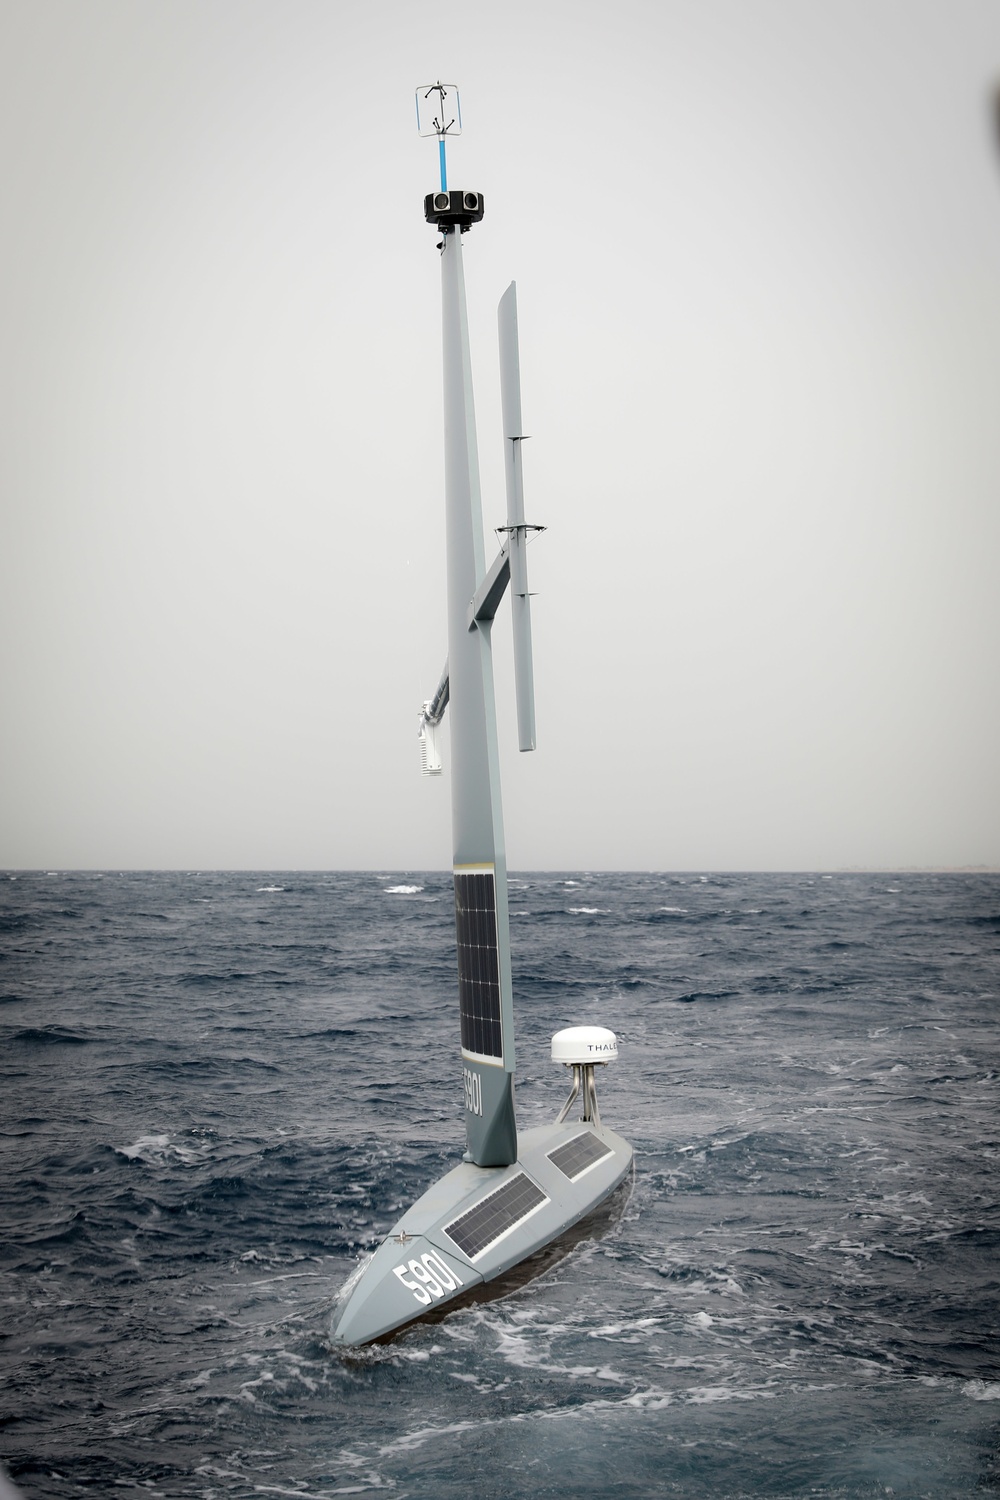 NAVCENT Launches Saildrone in Gulf of Aqaba for Exercise Digital Horizon